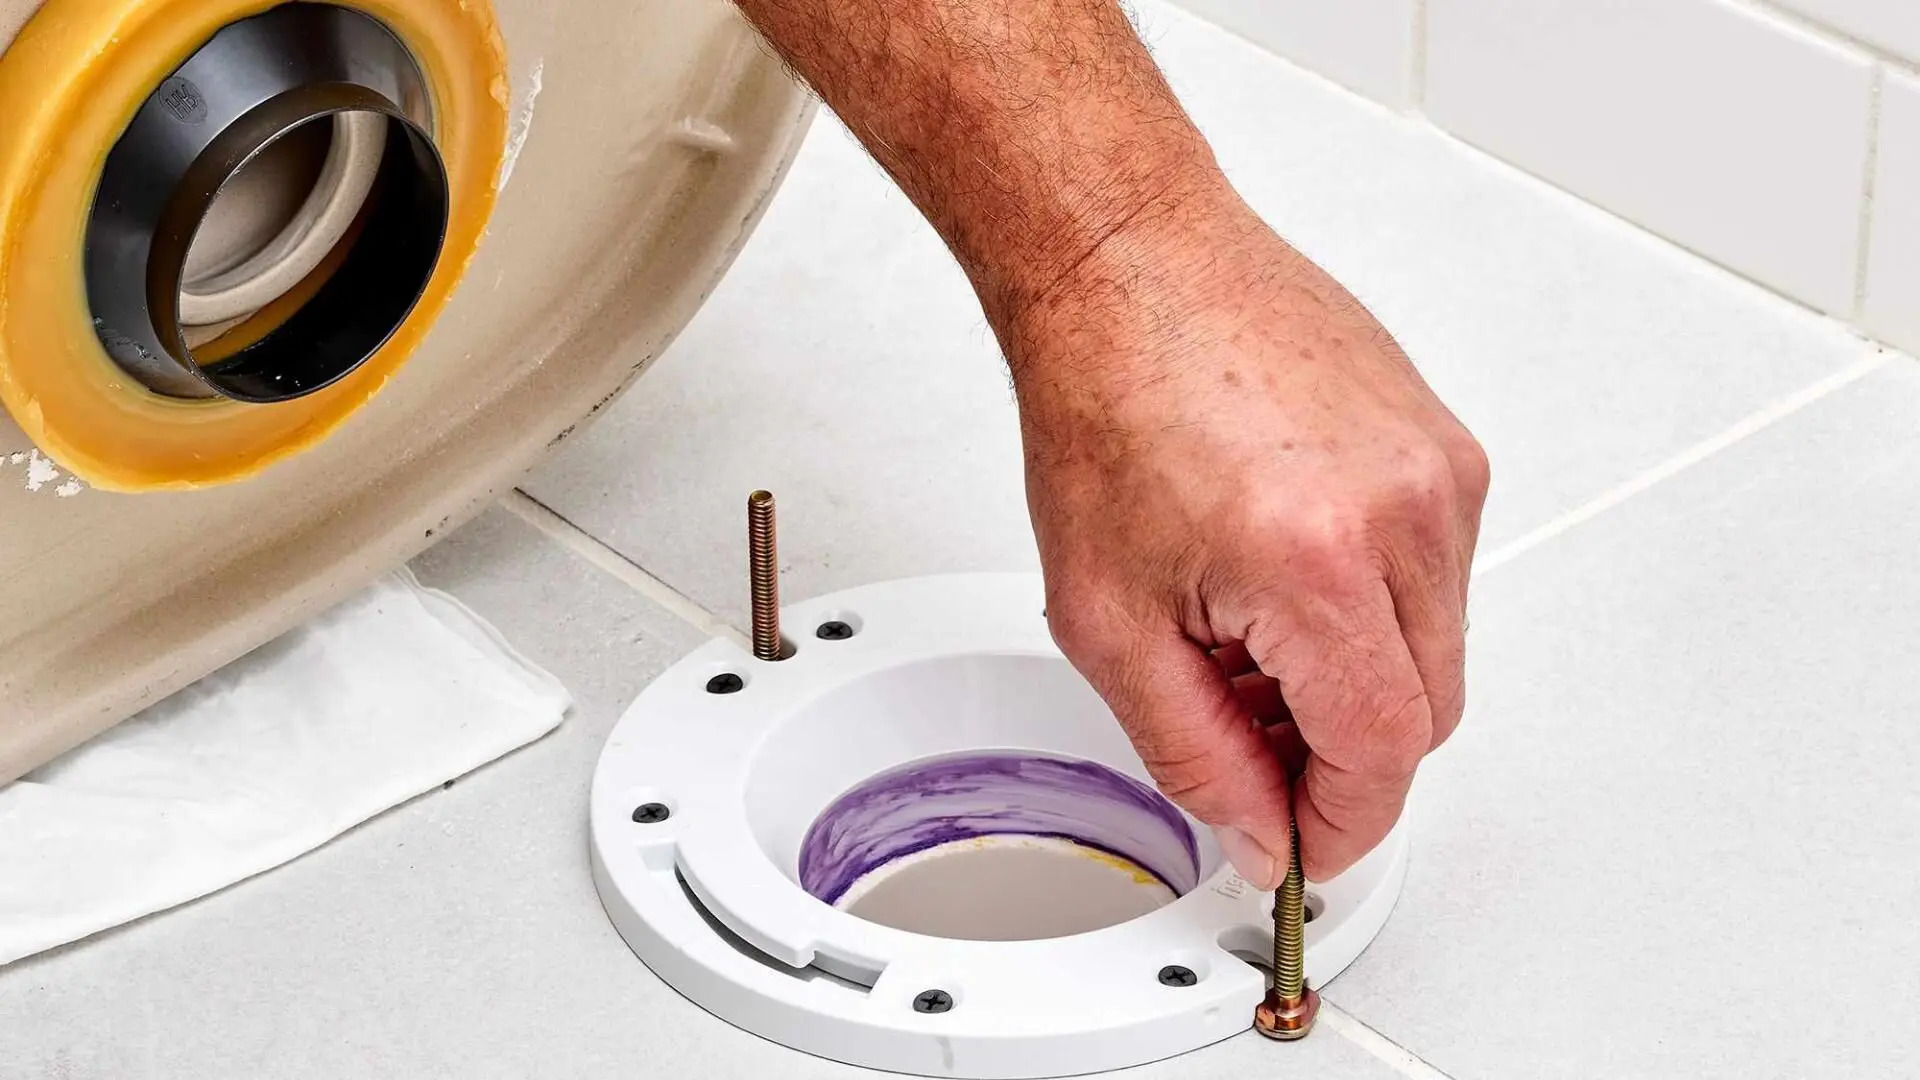 flexible PVC/ABS toilet flanges, ideal for modern plumbing systems